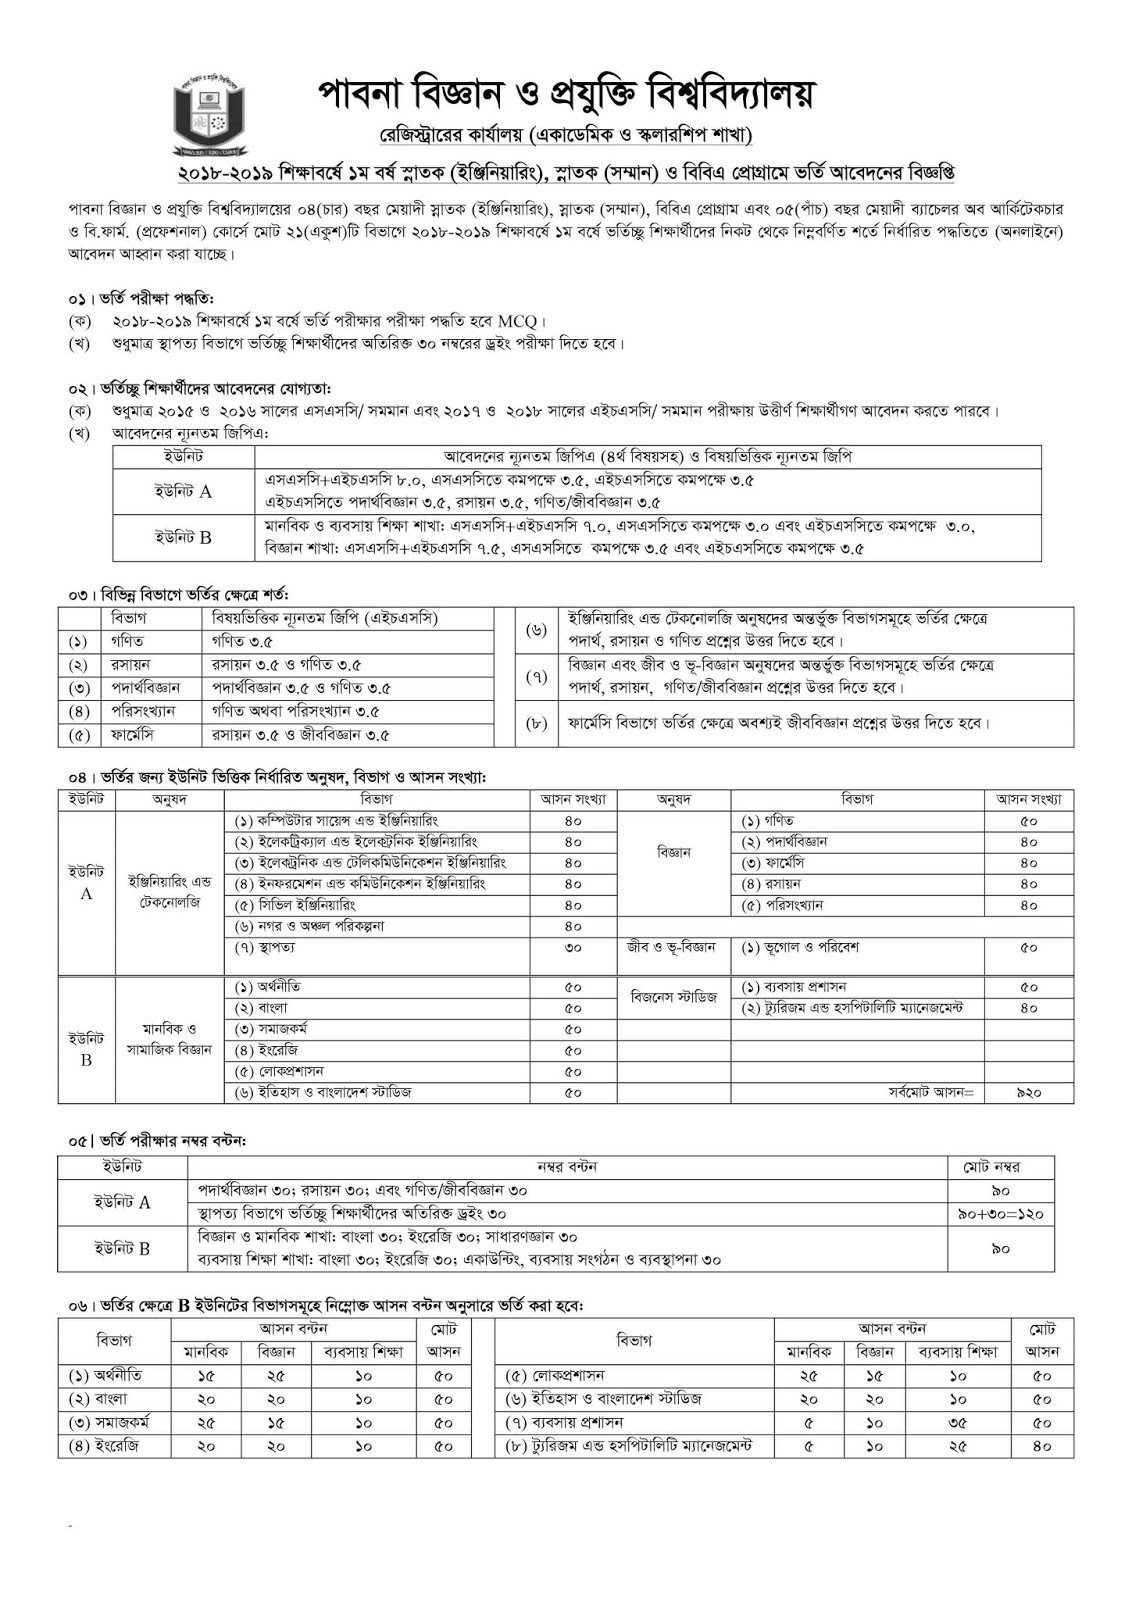 Pabna University of Science & Technology (PUST) Admission Test Circular 2018-2019